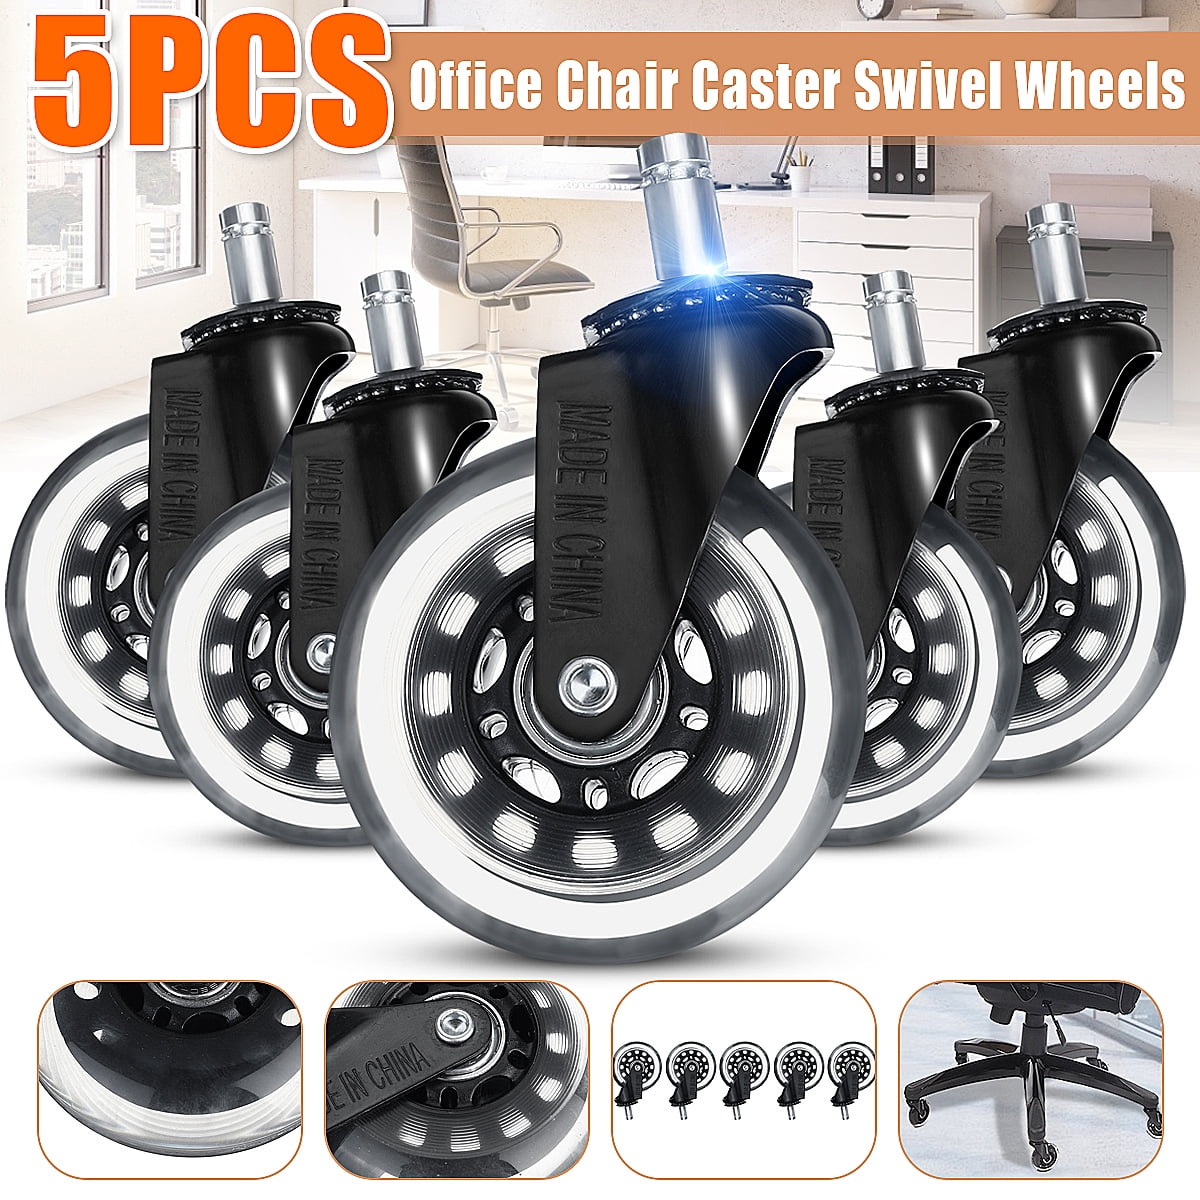 Set of 5 Office Chair Caster Rubber Swivel Wheels Replacement Heavy Duty 3 inch 